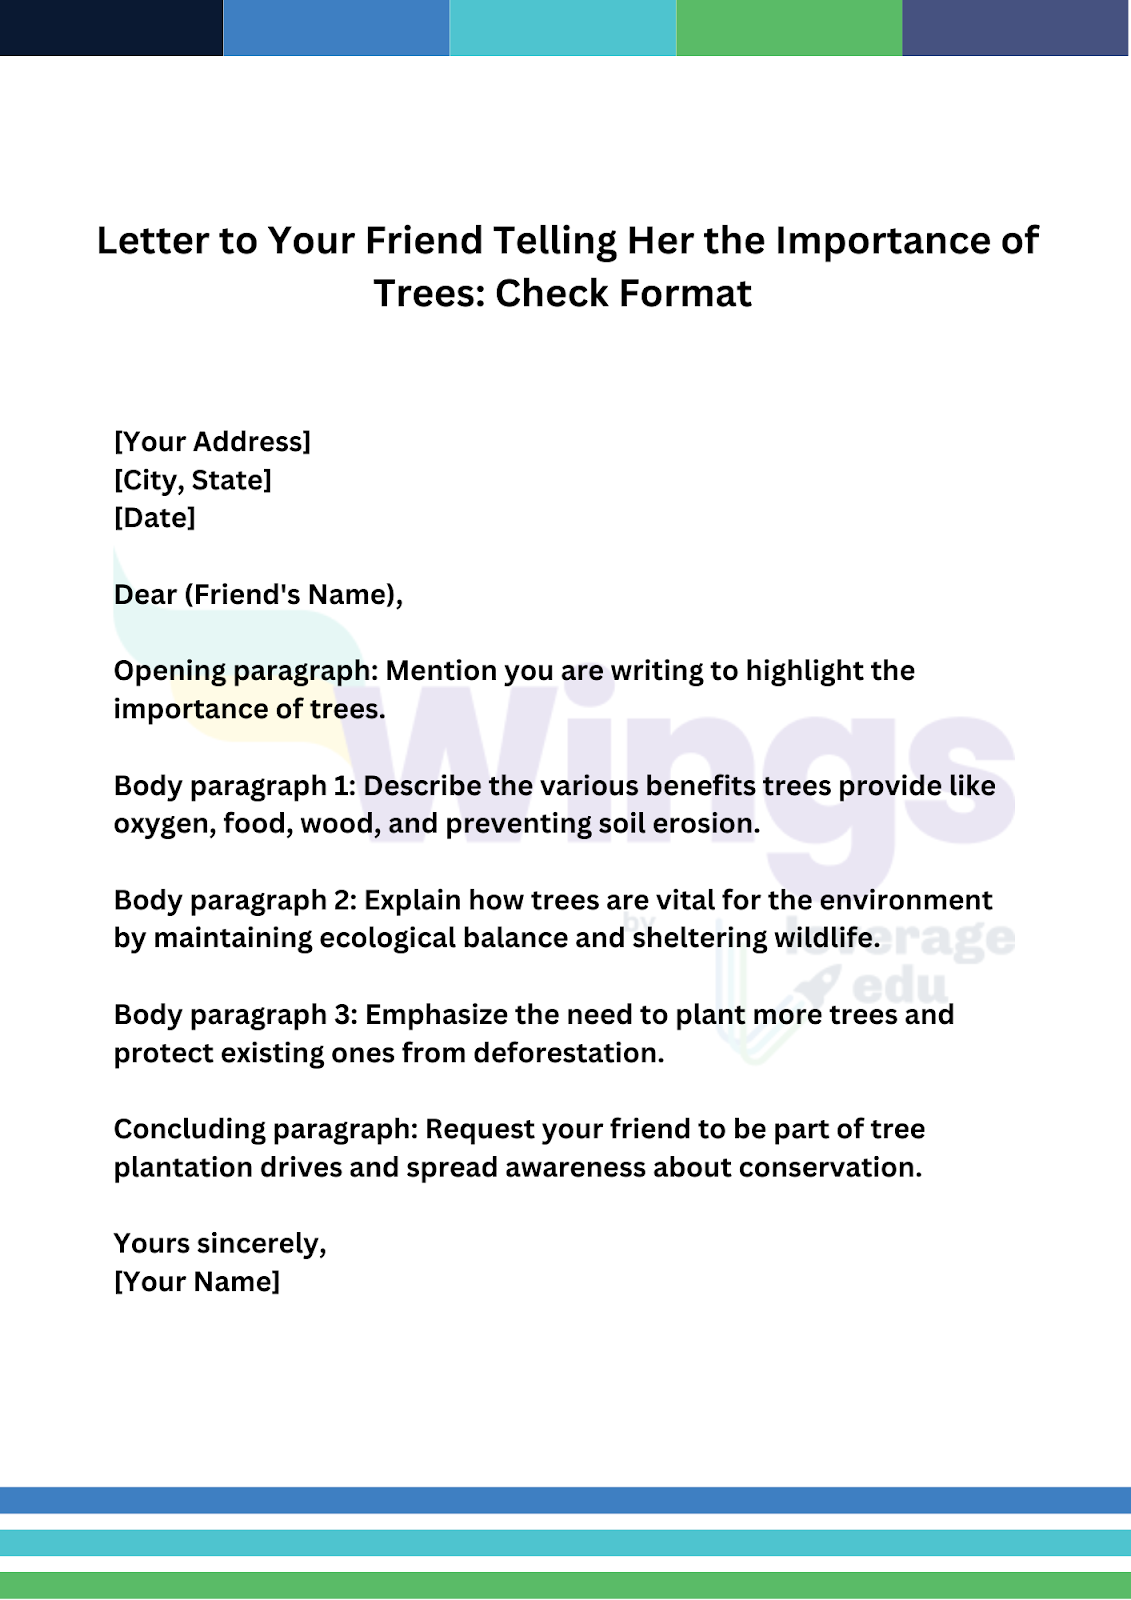 Write a Letter to Your Friend Telling Her the Importance of Trees